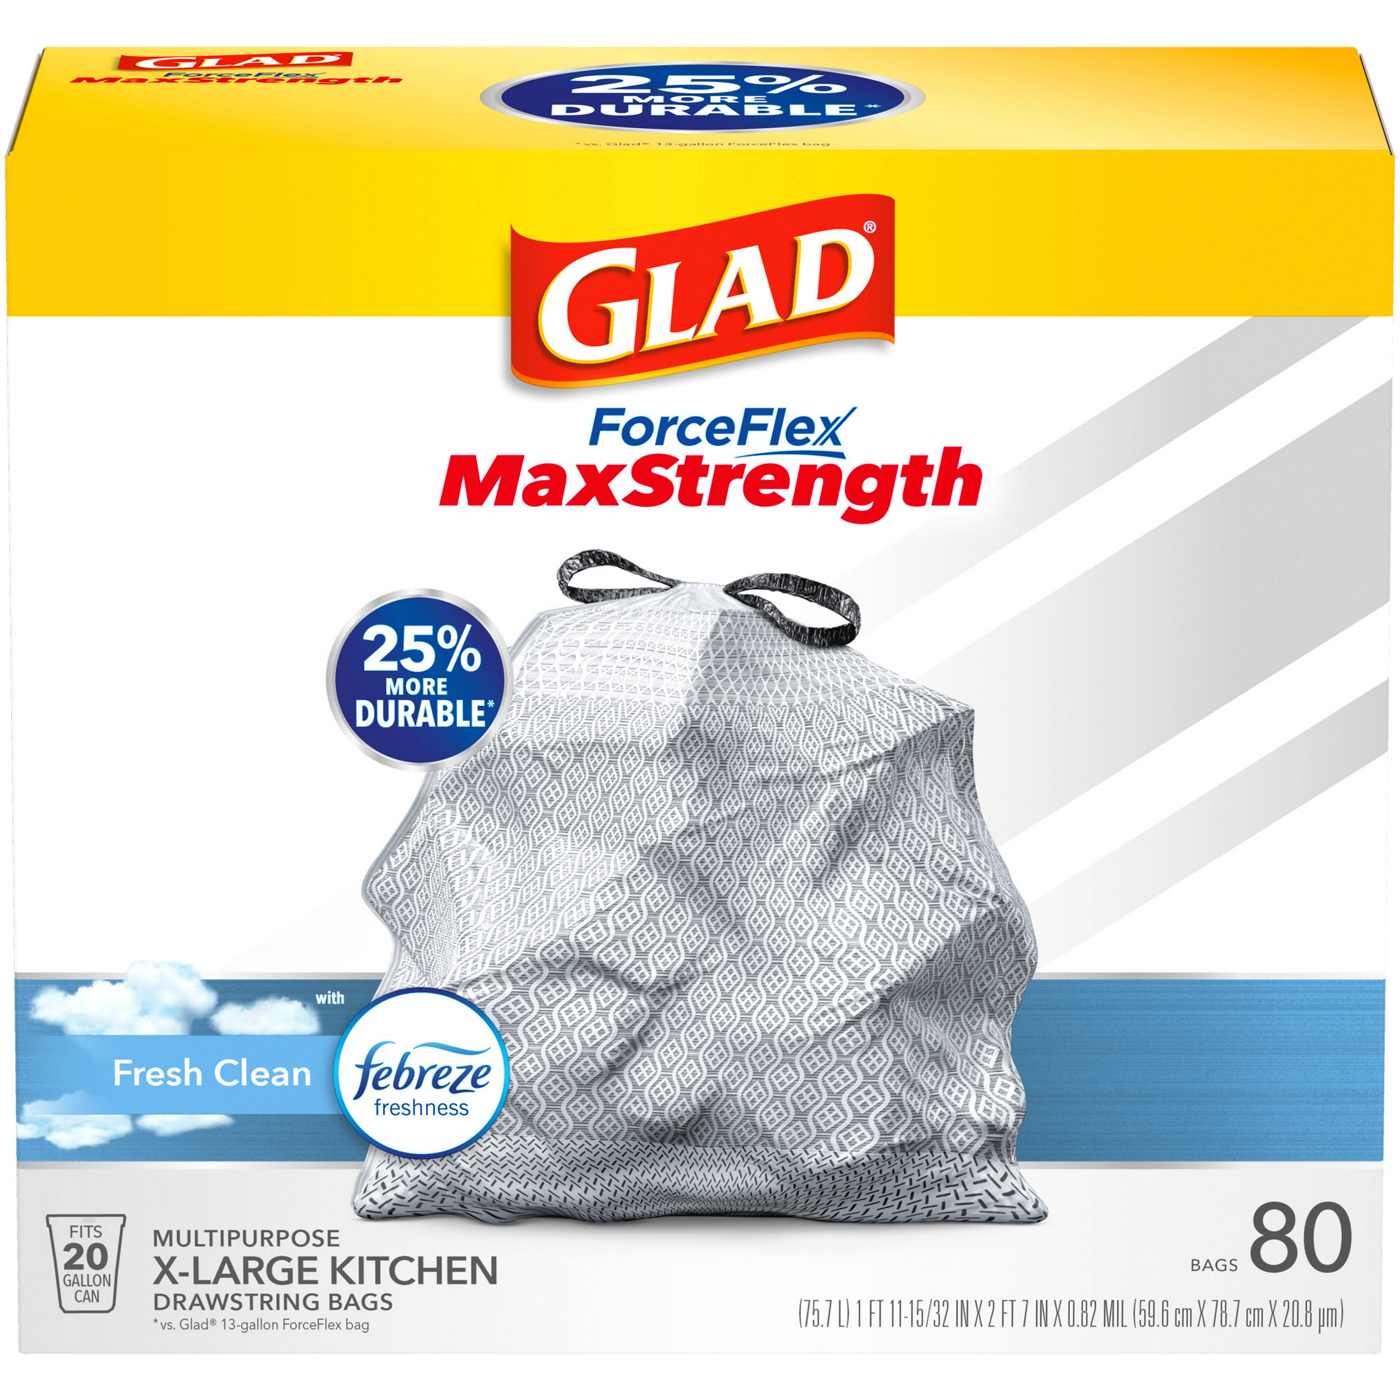 Glad ForceFlex MaxStrength X-Large Kitchen Drawstring Trash Bags, 20 Gallon - Fresh Clean Scent with Febreze Freshness; image 1 of 9